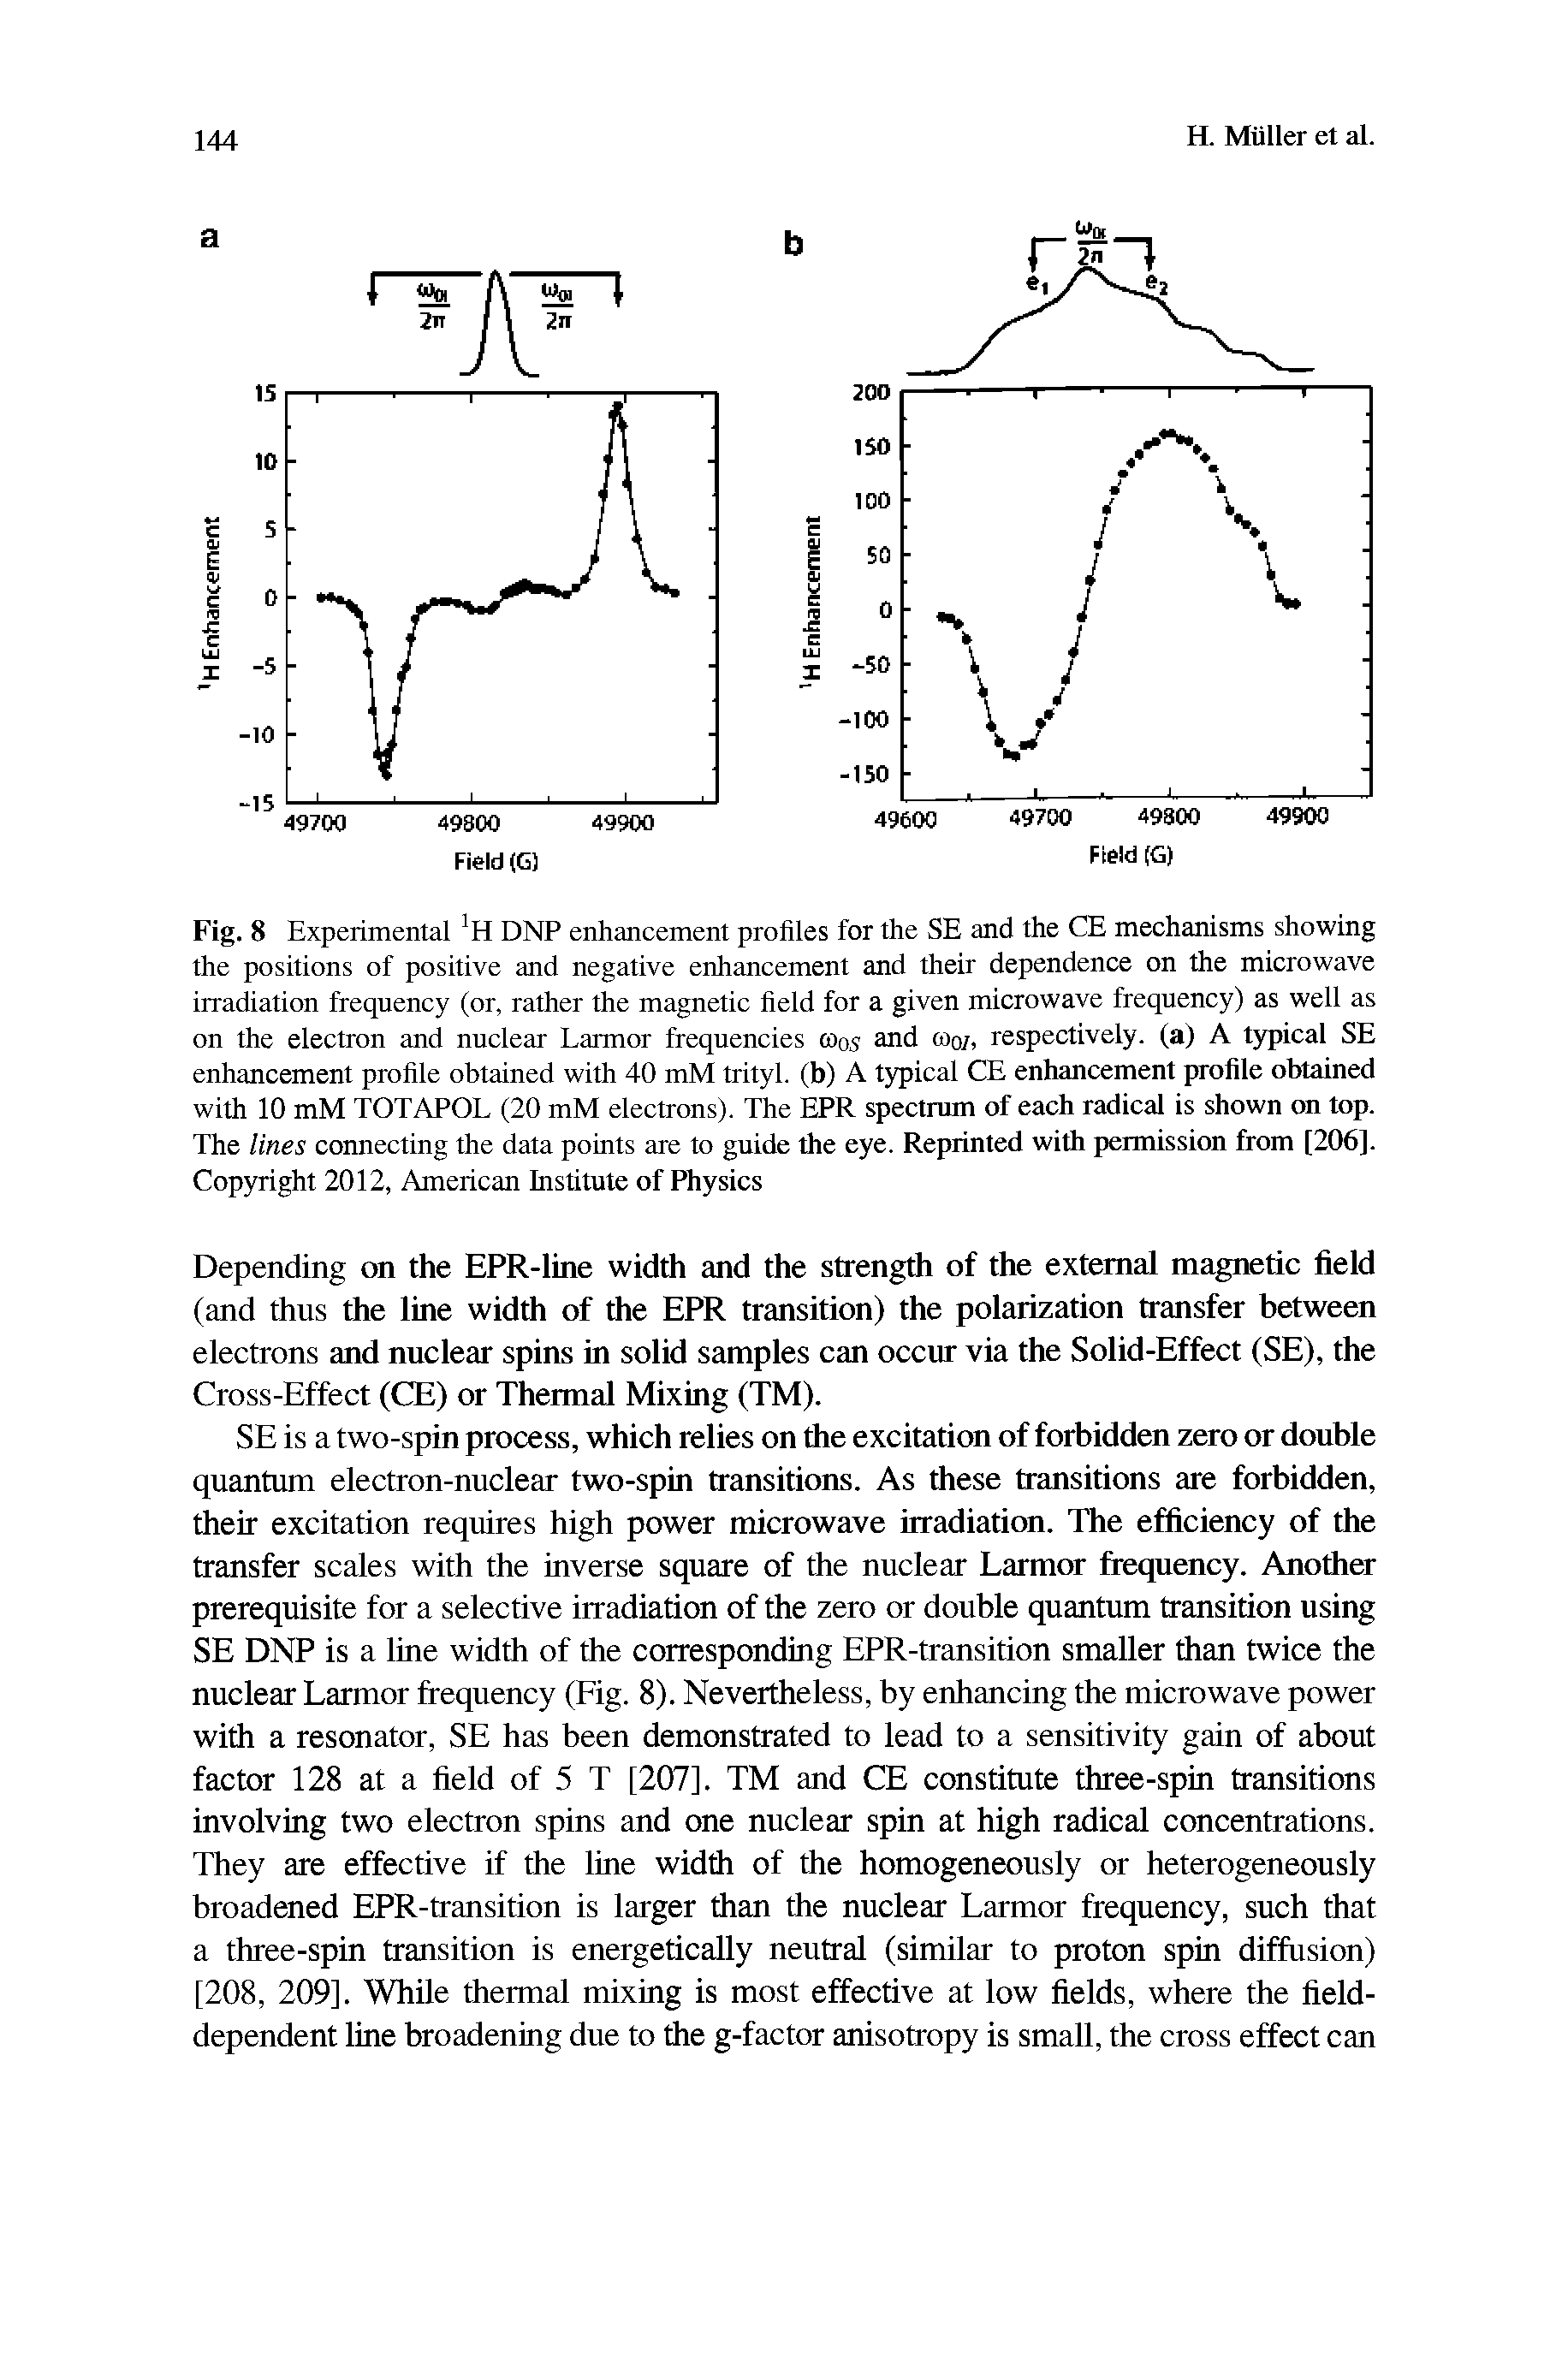 Fig. 8 Experimental DNP enhancement profiles for the SE and the CE mechanisms showing the positions of positive and negative enhancement and their dependence on the microwave irradiation frequency (or, rather the magnetic field for a given microwave frequency) as well as on the electron and nuclear Larmor frequencies coos and too/, respectively, (a) A tj/pical SE enhancement profile obtained with 40 mM trityl. (b) A typical CE enhancement profile obtained with 10 mM TOTAPOL (20 mM electrons). The EPR spectrum of each radical is shown on top. The lines connecting the data points are to guide the eye. Reprinted with permission from [206]. Copyright 2012, American Institute of Physics...